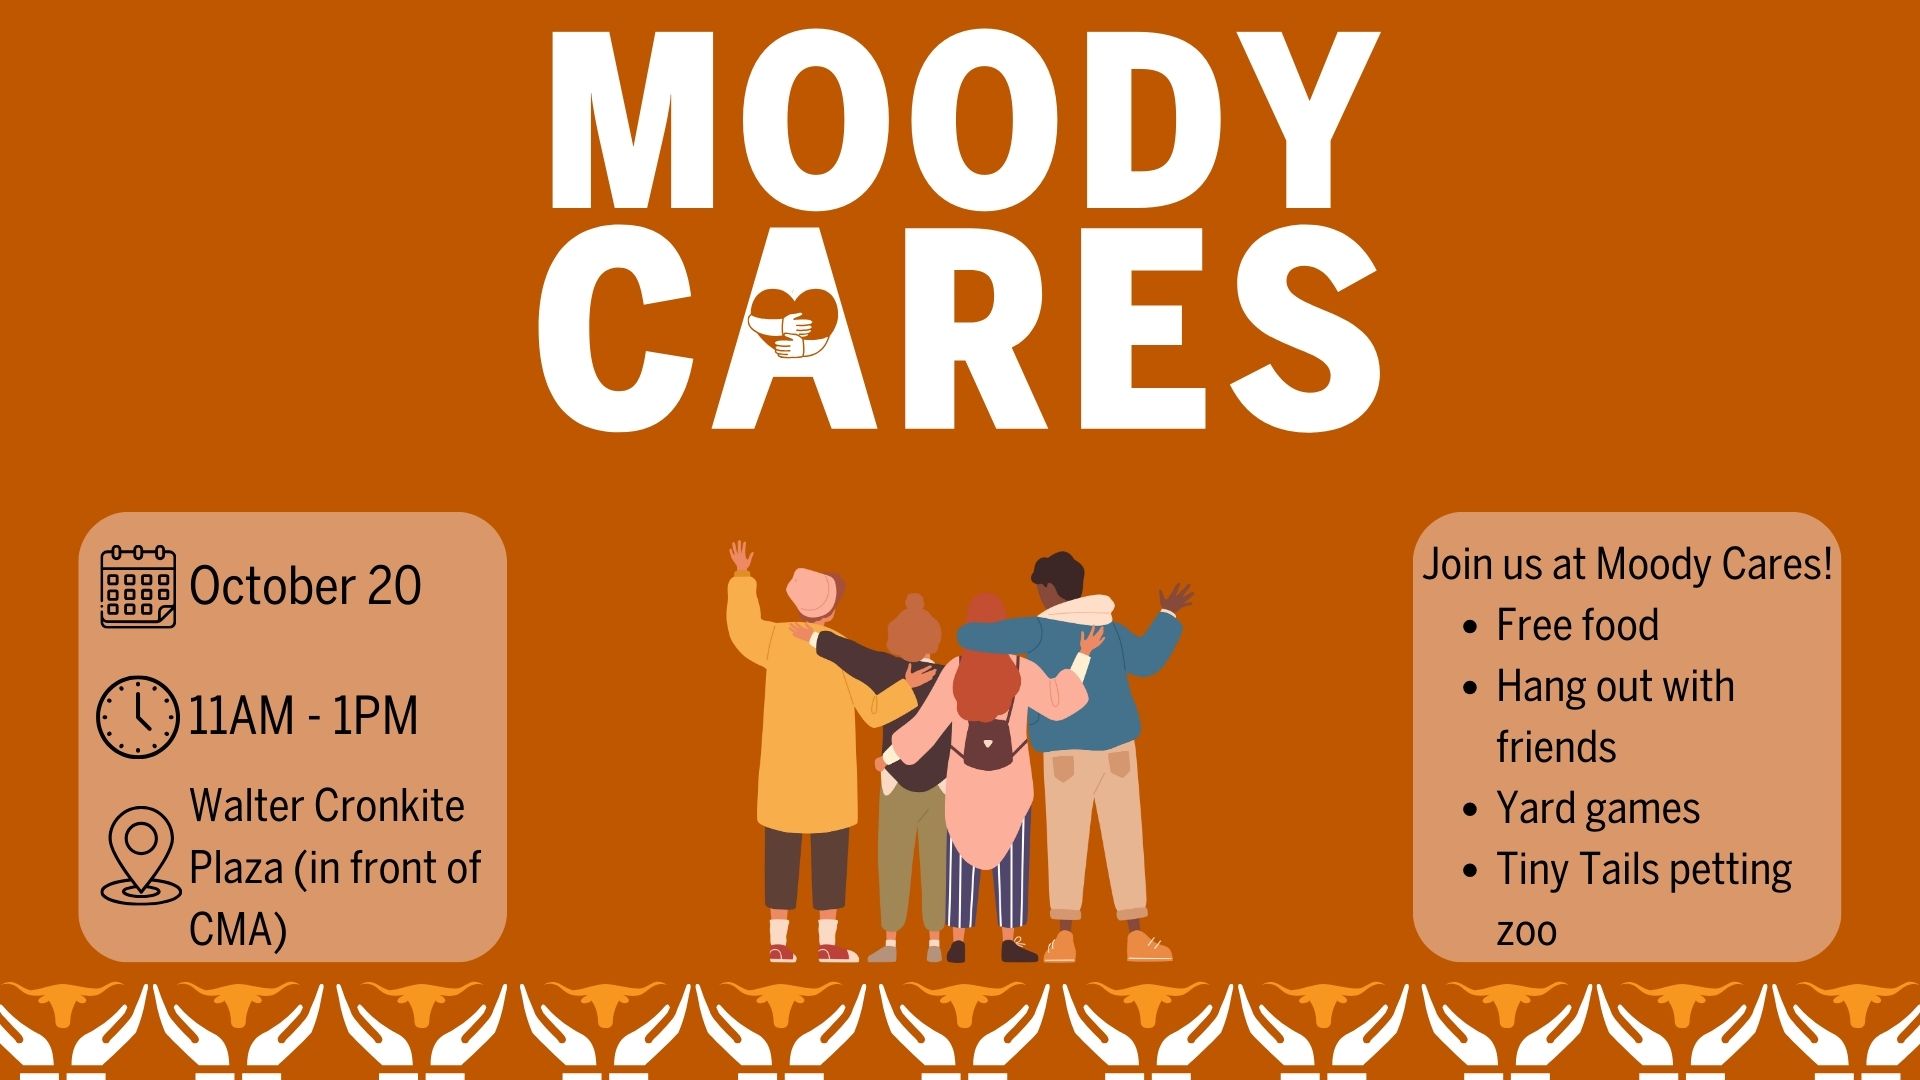 Moody CARES flyer scheduled for October 20th from 11AM to 1PM at Walter Cronkite Plaza. 